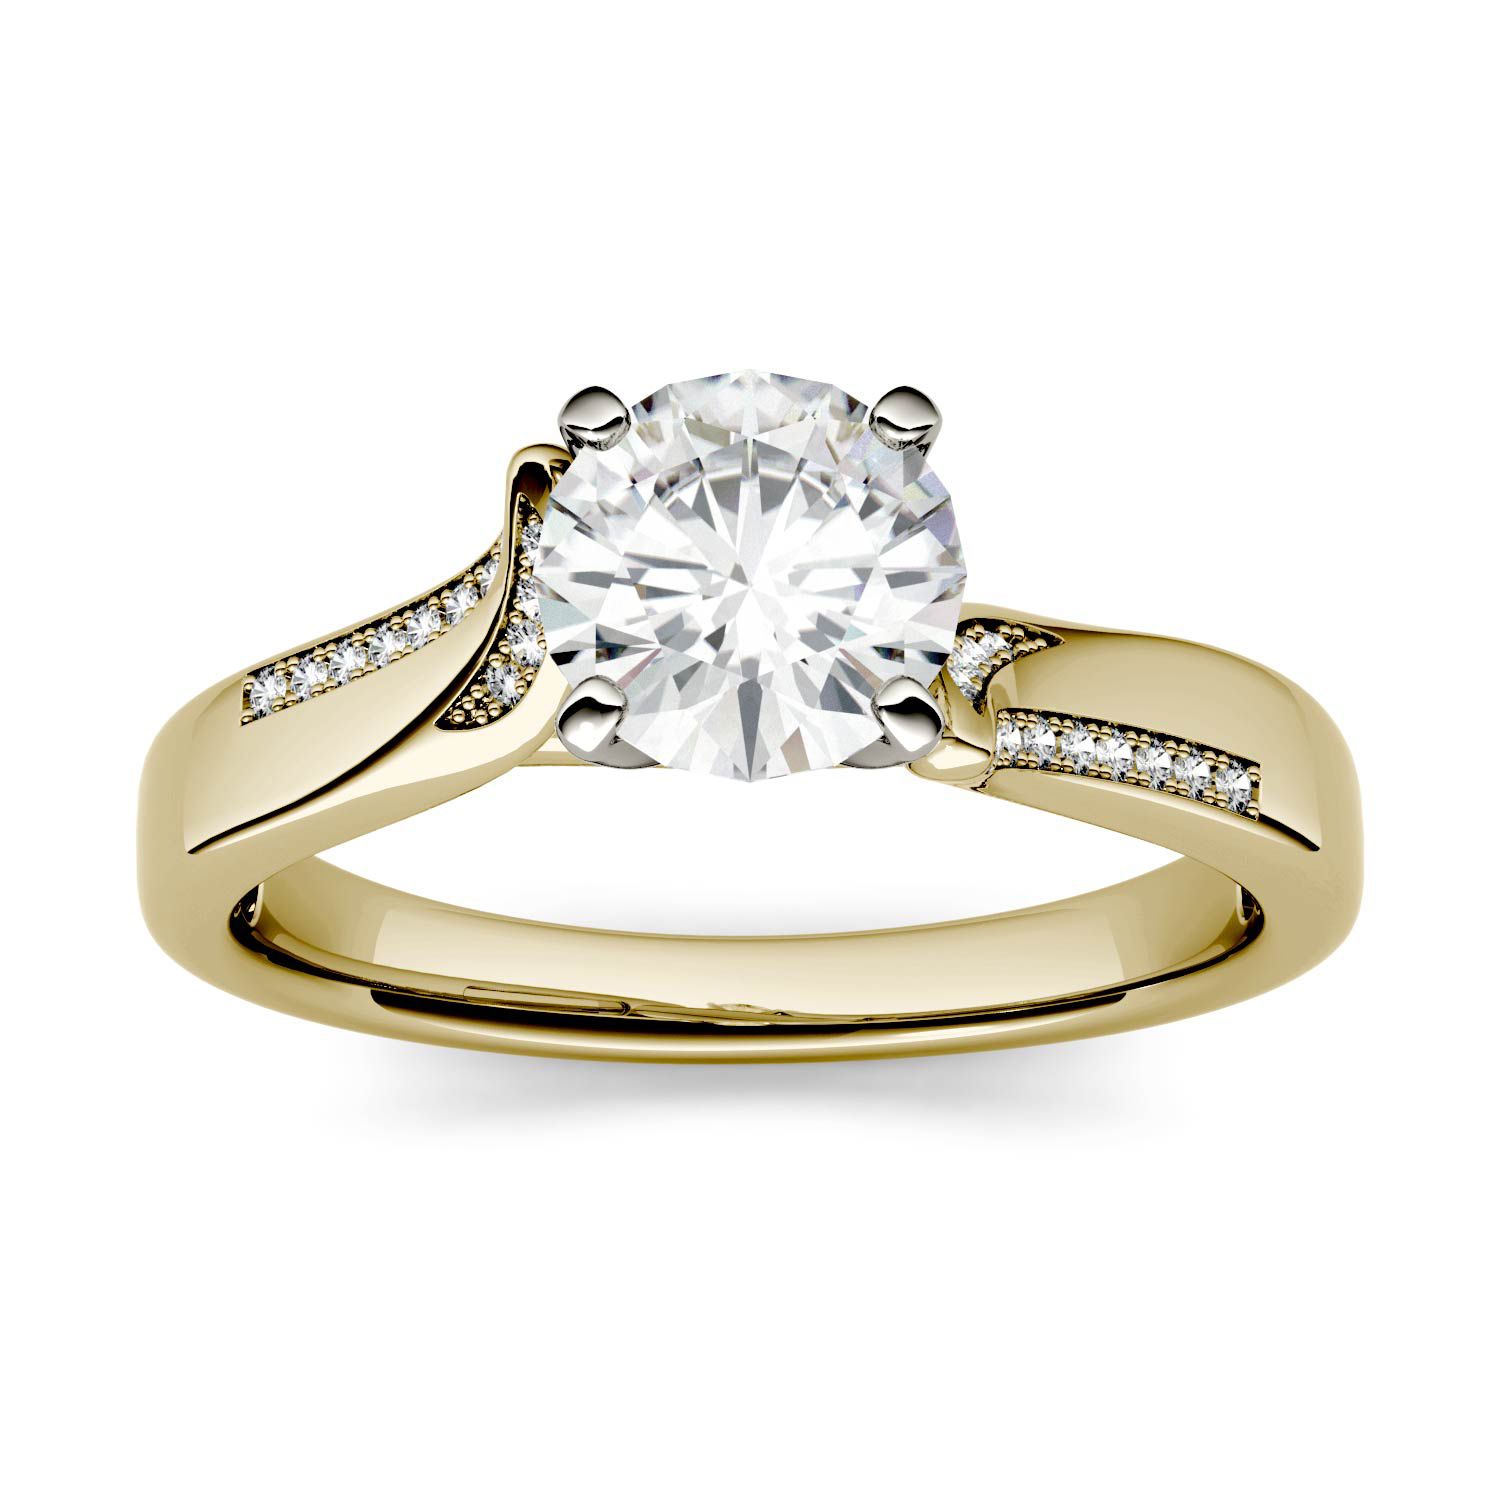 CHARLES & COLVARD: Round Near-colorless Moissanite Solitaire With Side Accents Engagement Ring